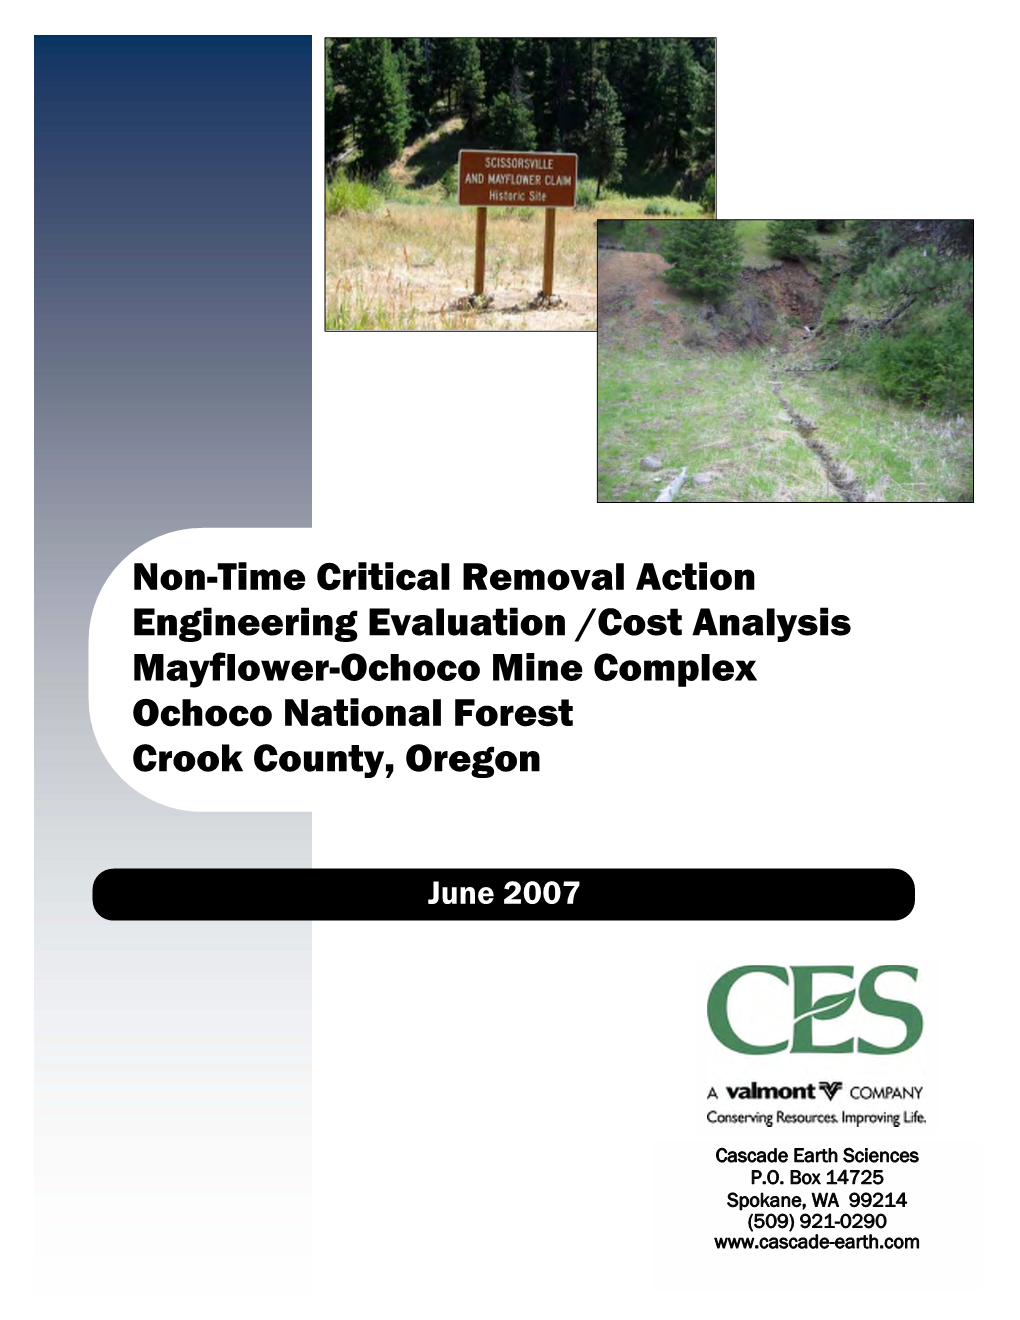 Final Engineering Evaluation & Cost Analysis